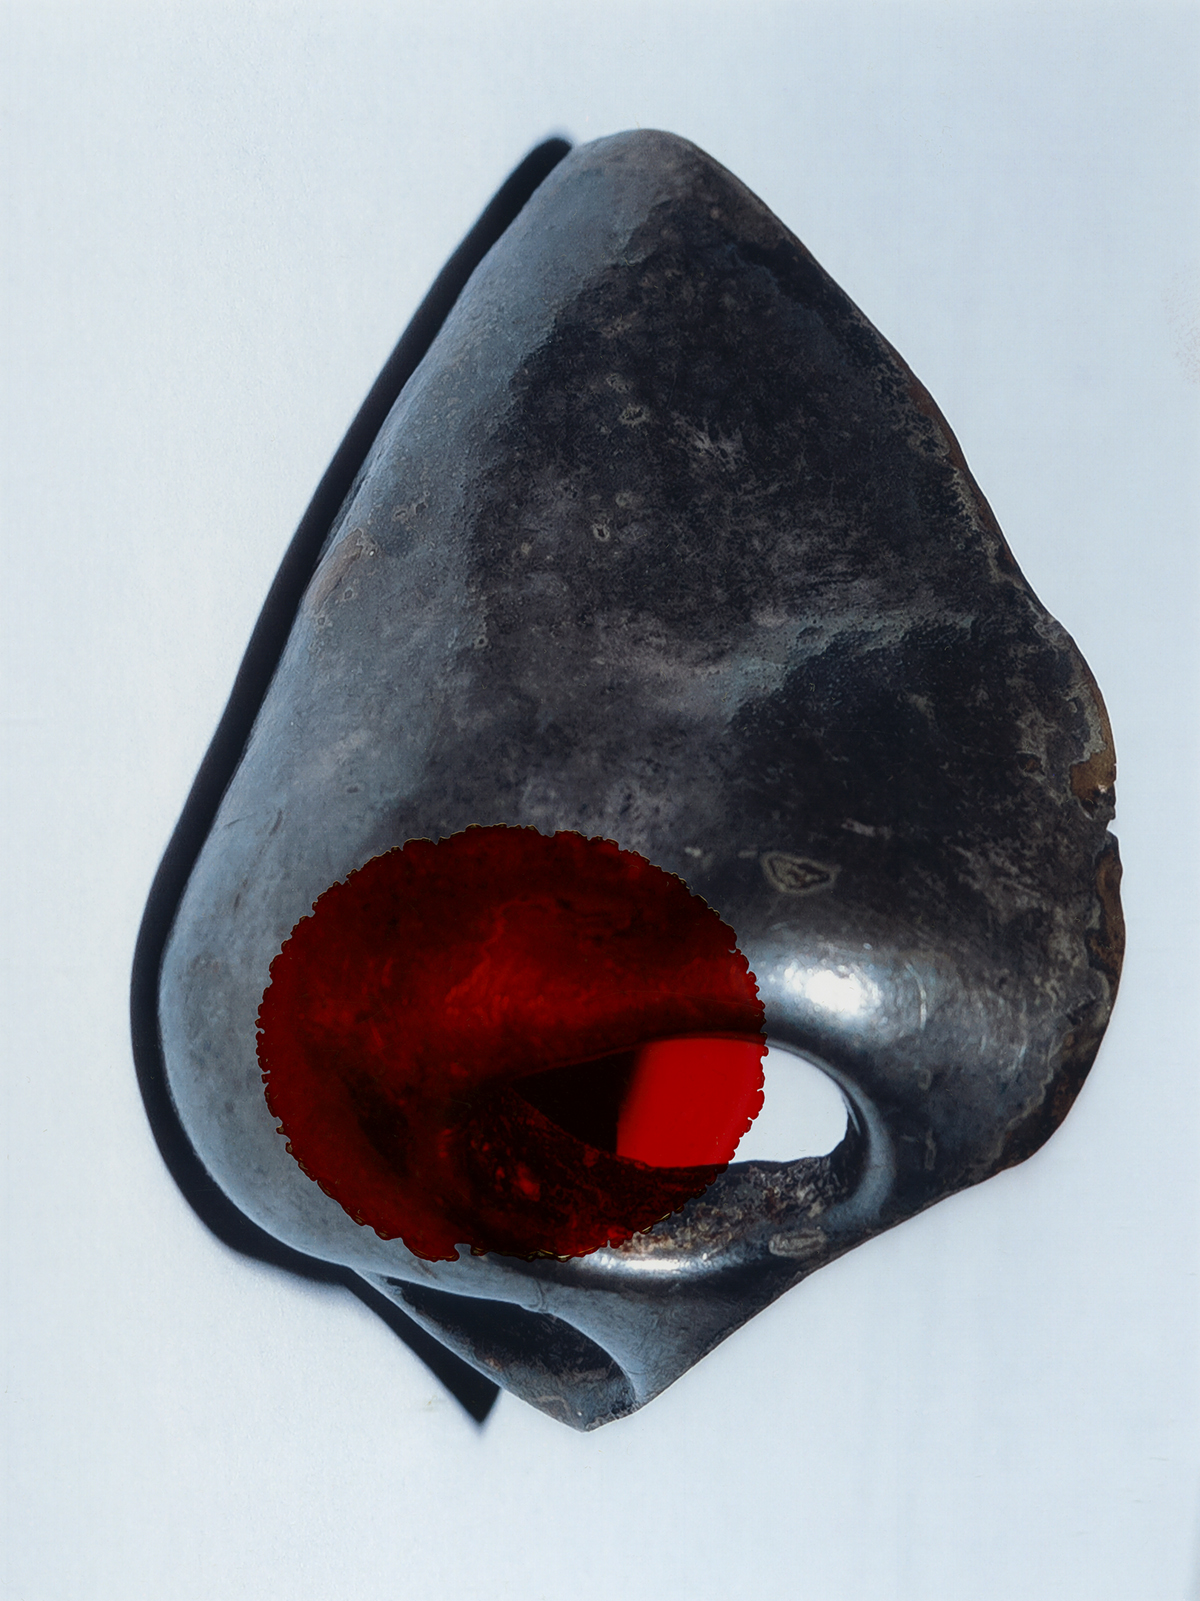 Abstract sculptural photograph with red circular graphic